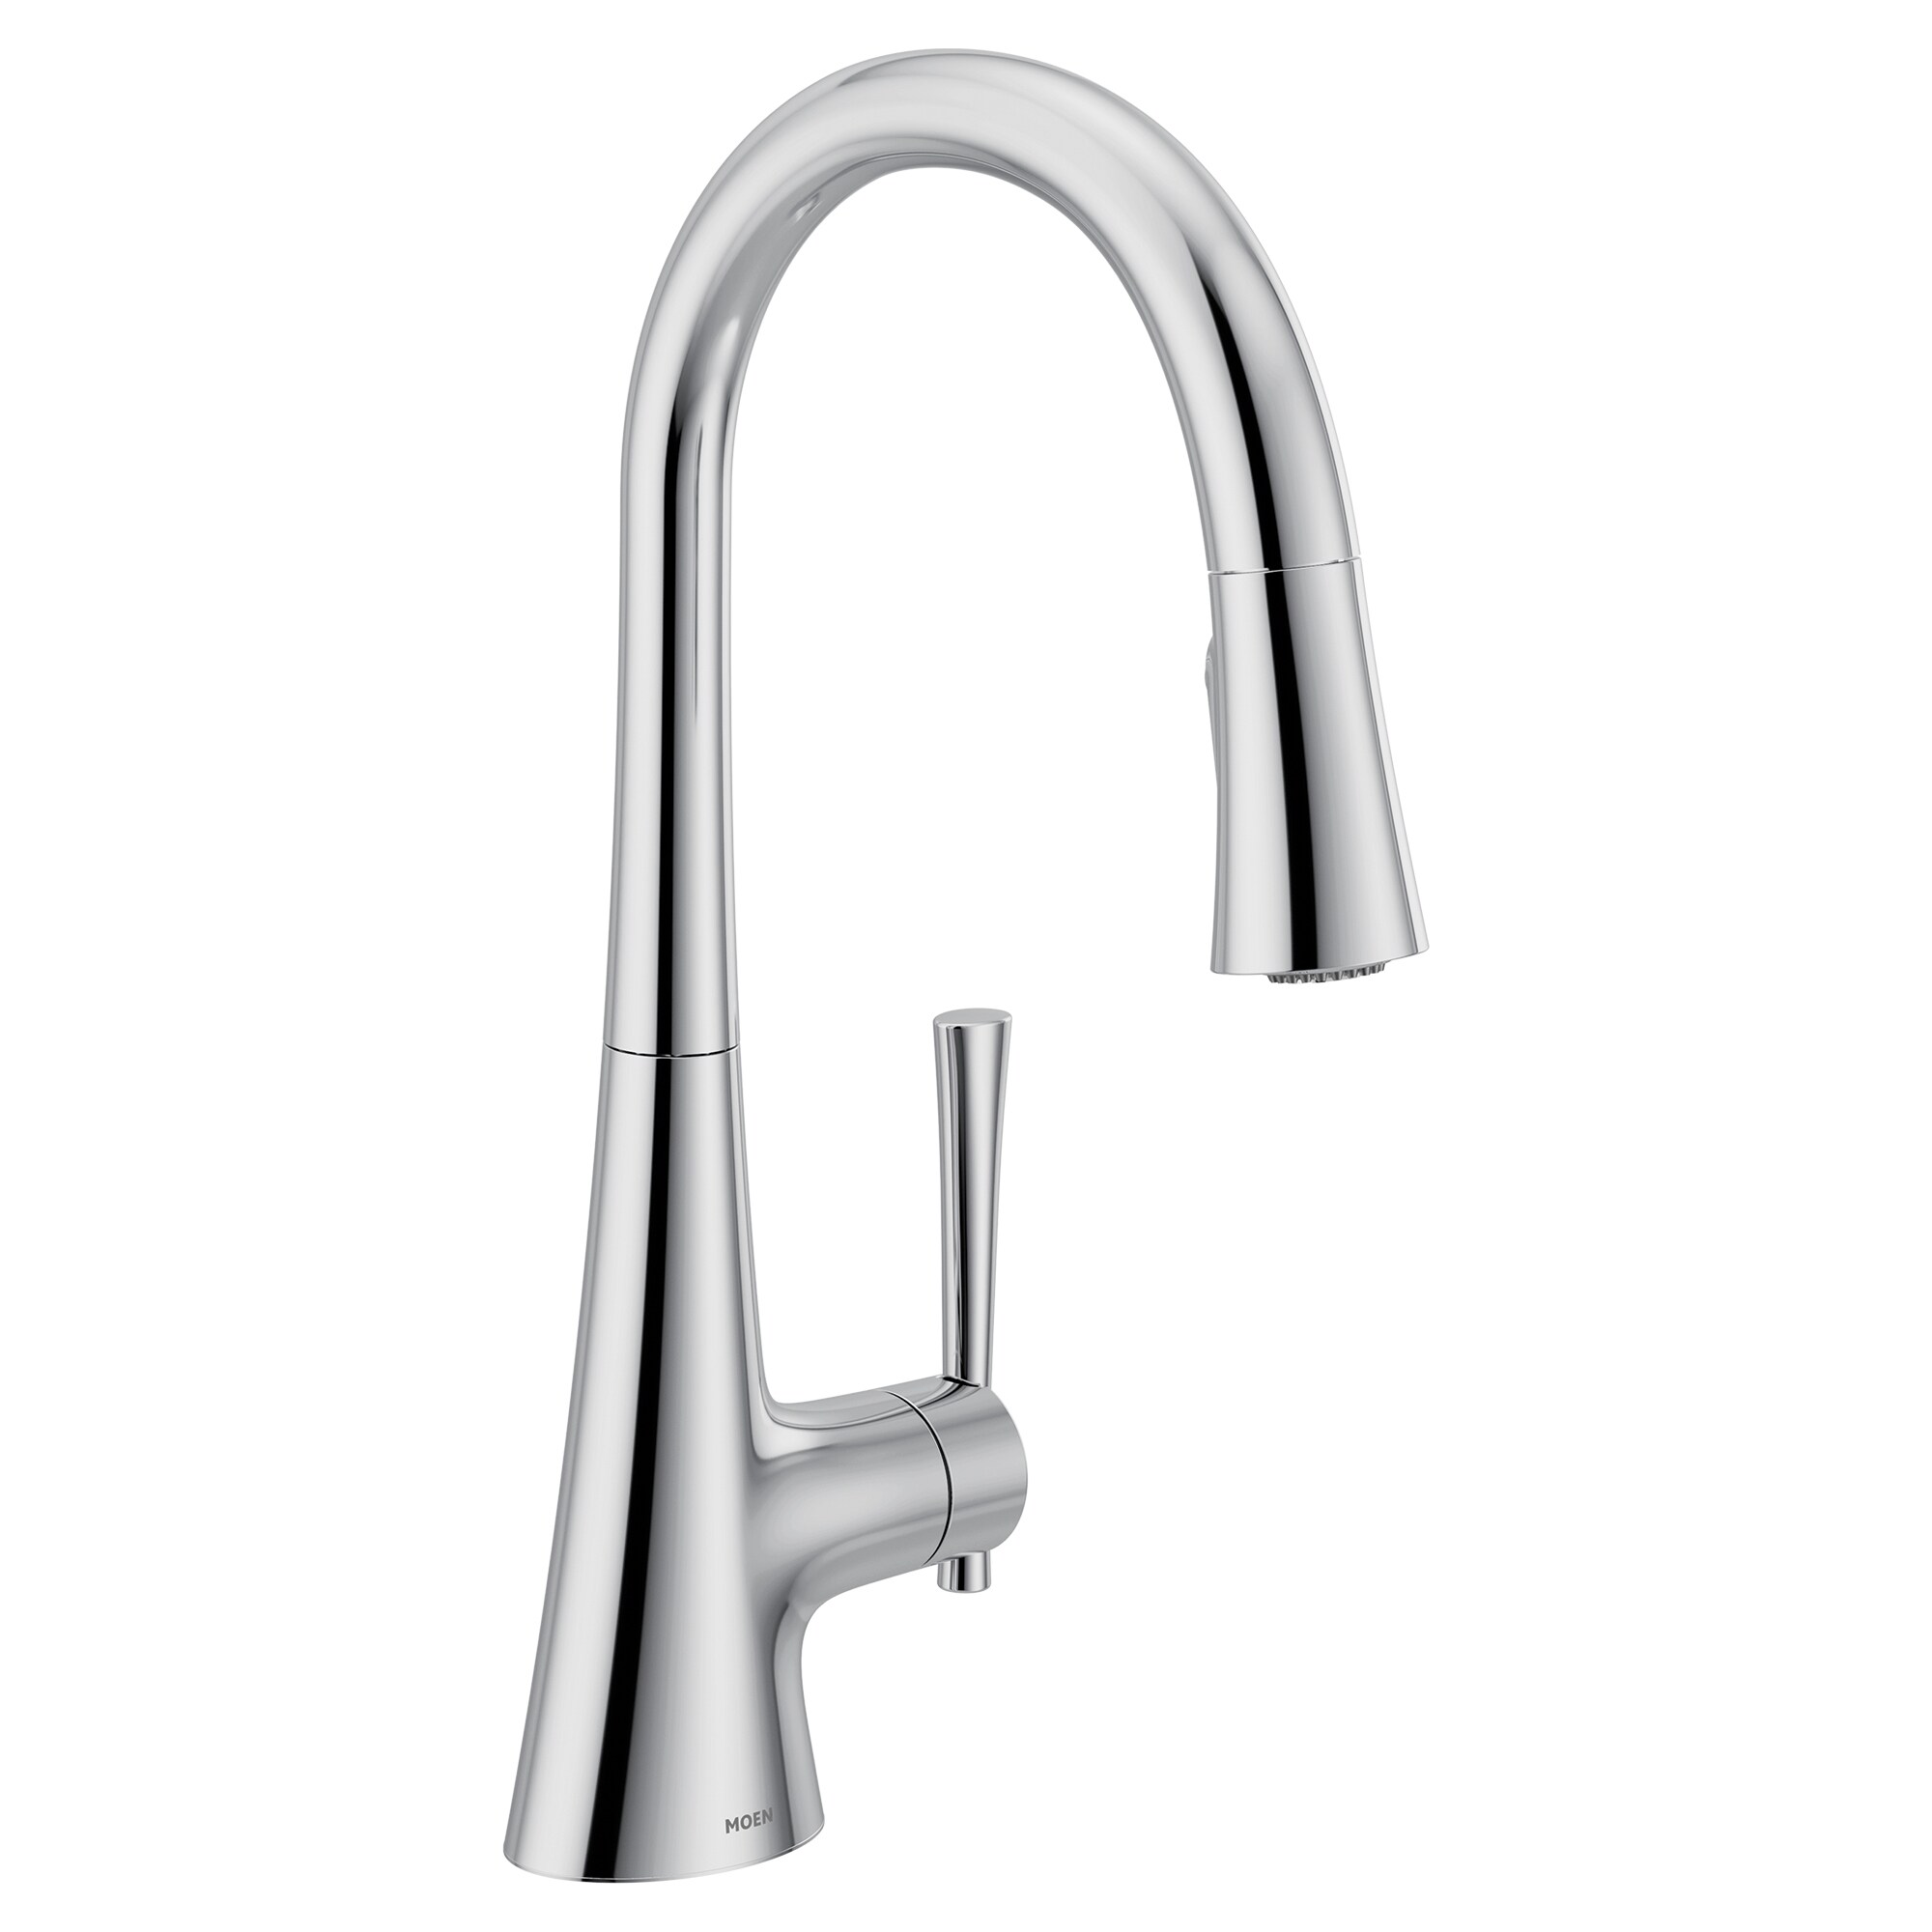 Moen Kurv Chrome Single Handle Pull-down Kitchen Faucet with 